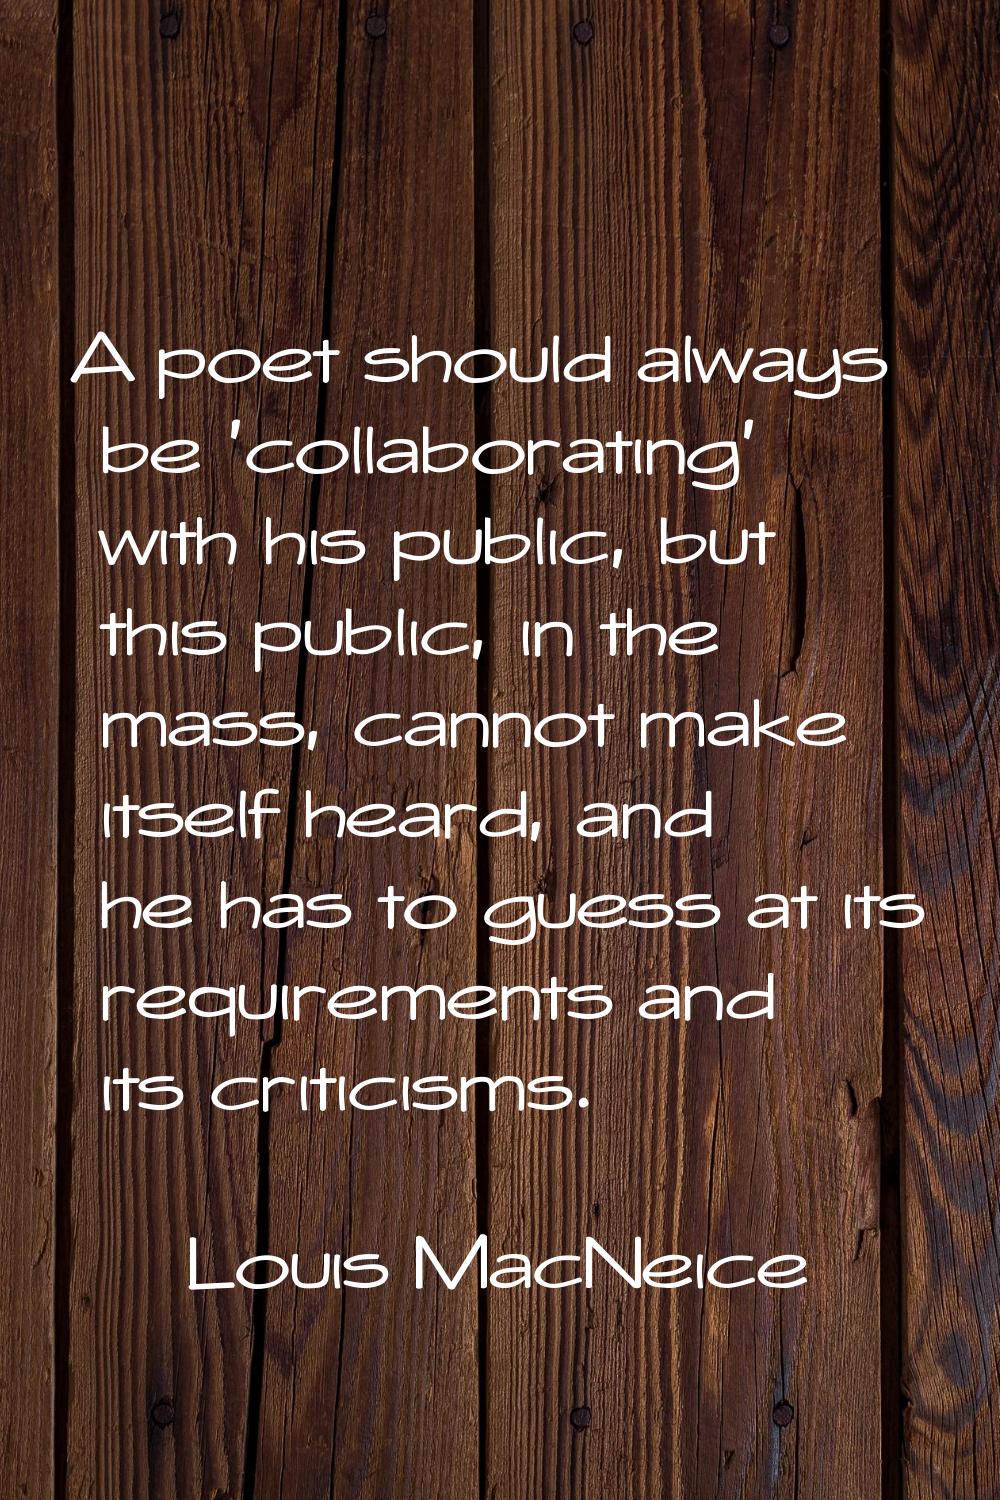 A poet should always be 'collaborating' with his public, but this public, in the mass, cannot make 